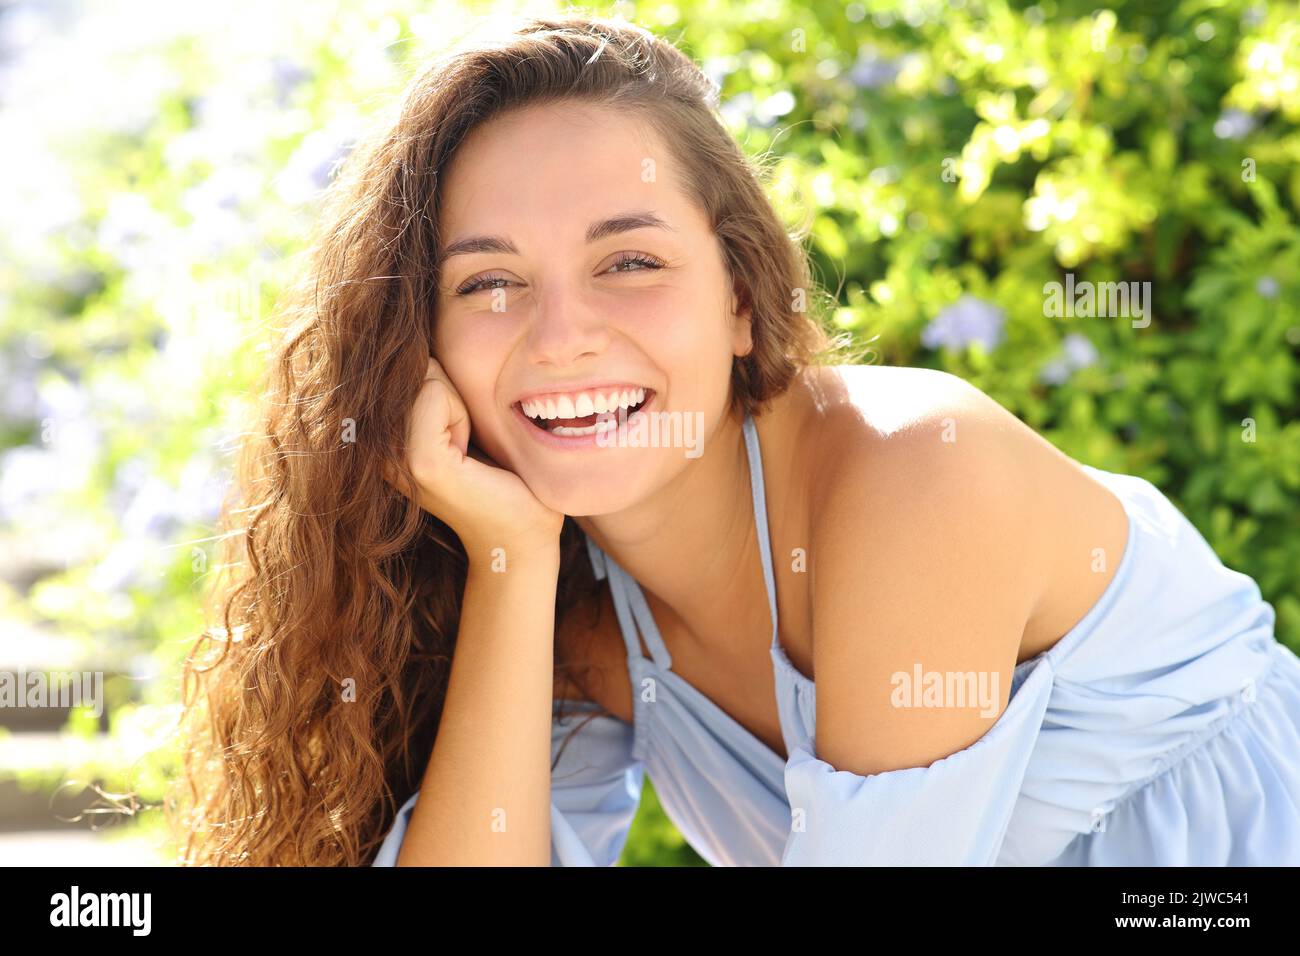 Portrait of a happy woman smiling at camera in a garden Stock Photo